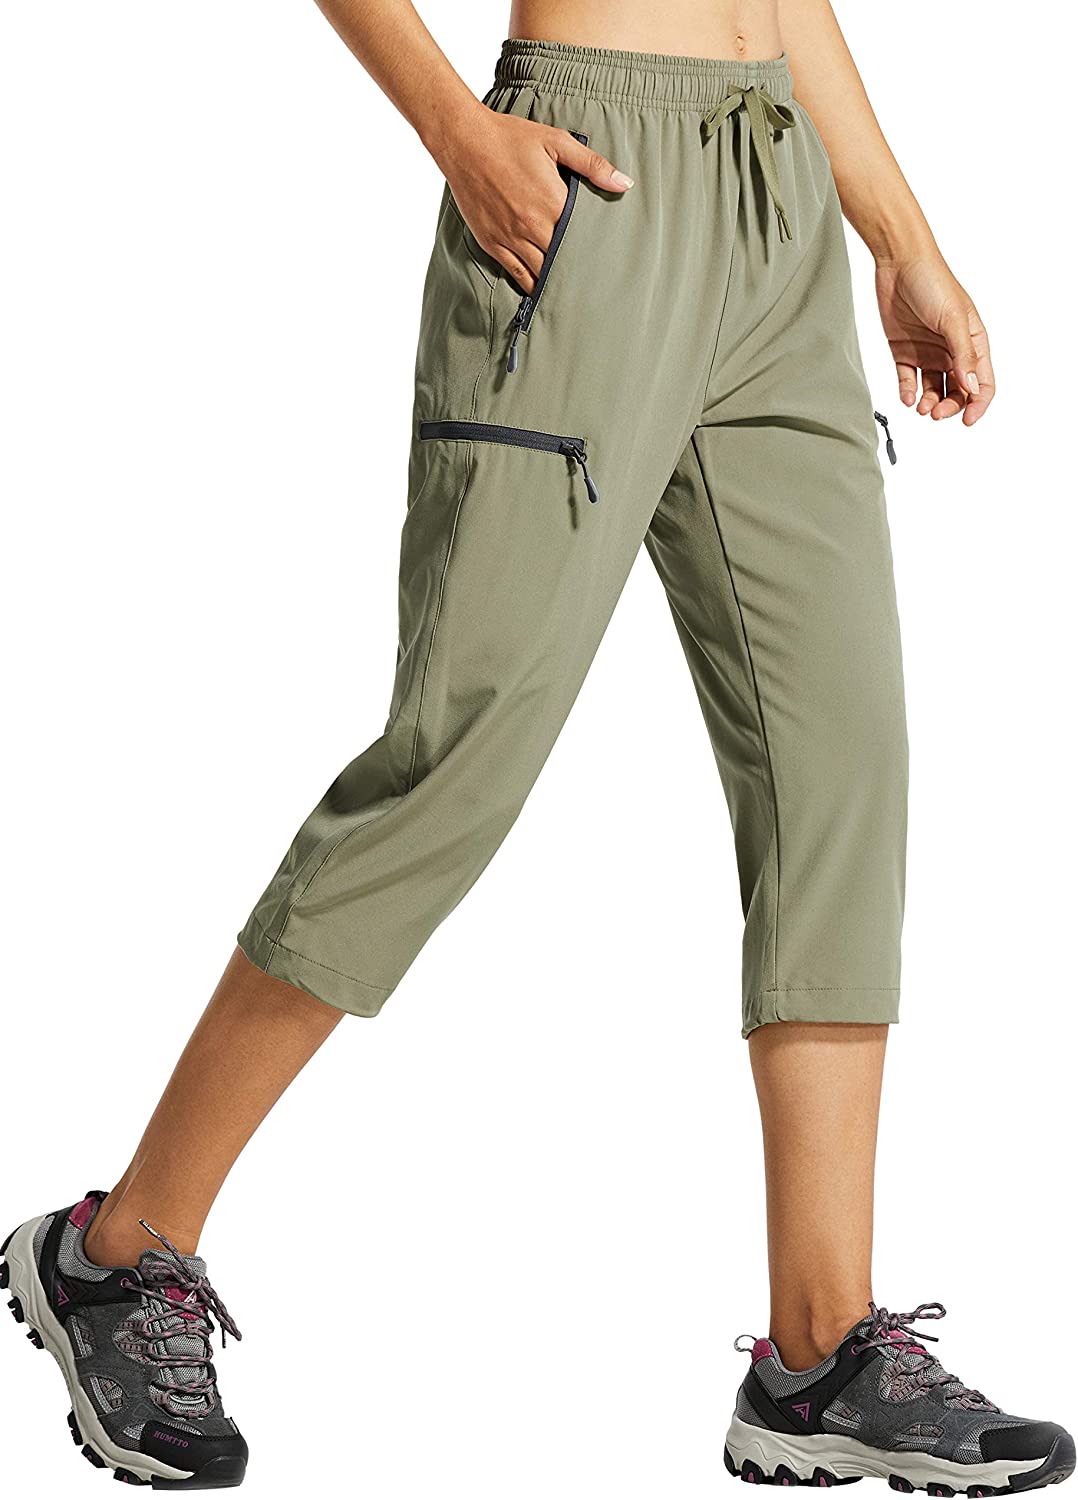 Cargo Hiking Pants Lightweight Quick Dry Capri Pants Athletic Workout Casual Outdoor Zipper Pockets